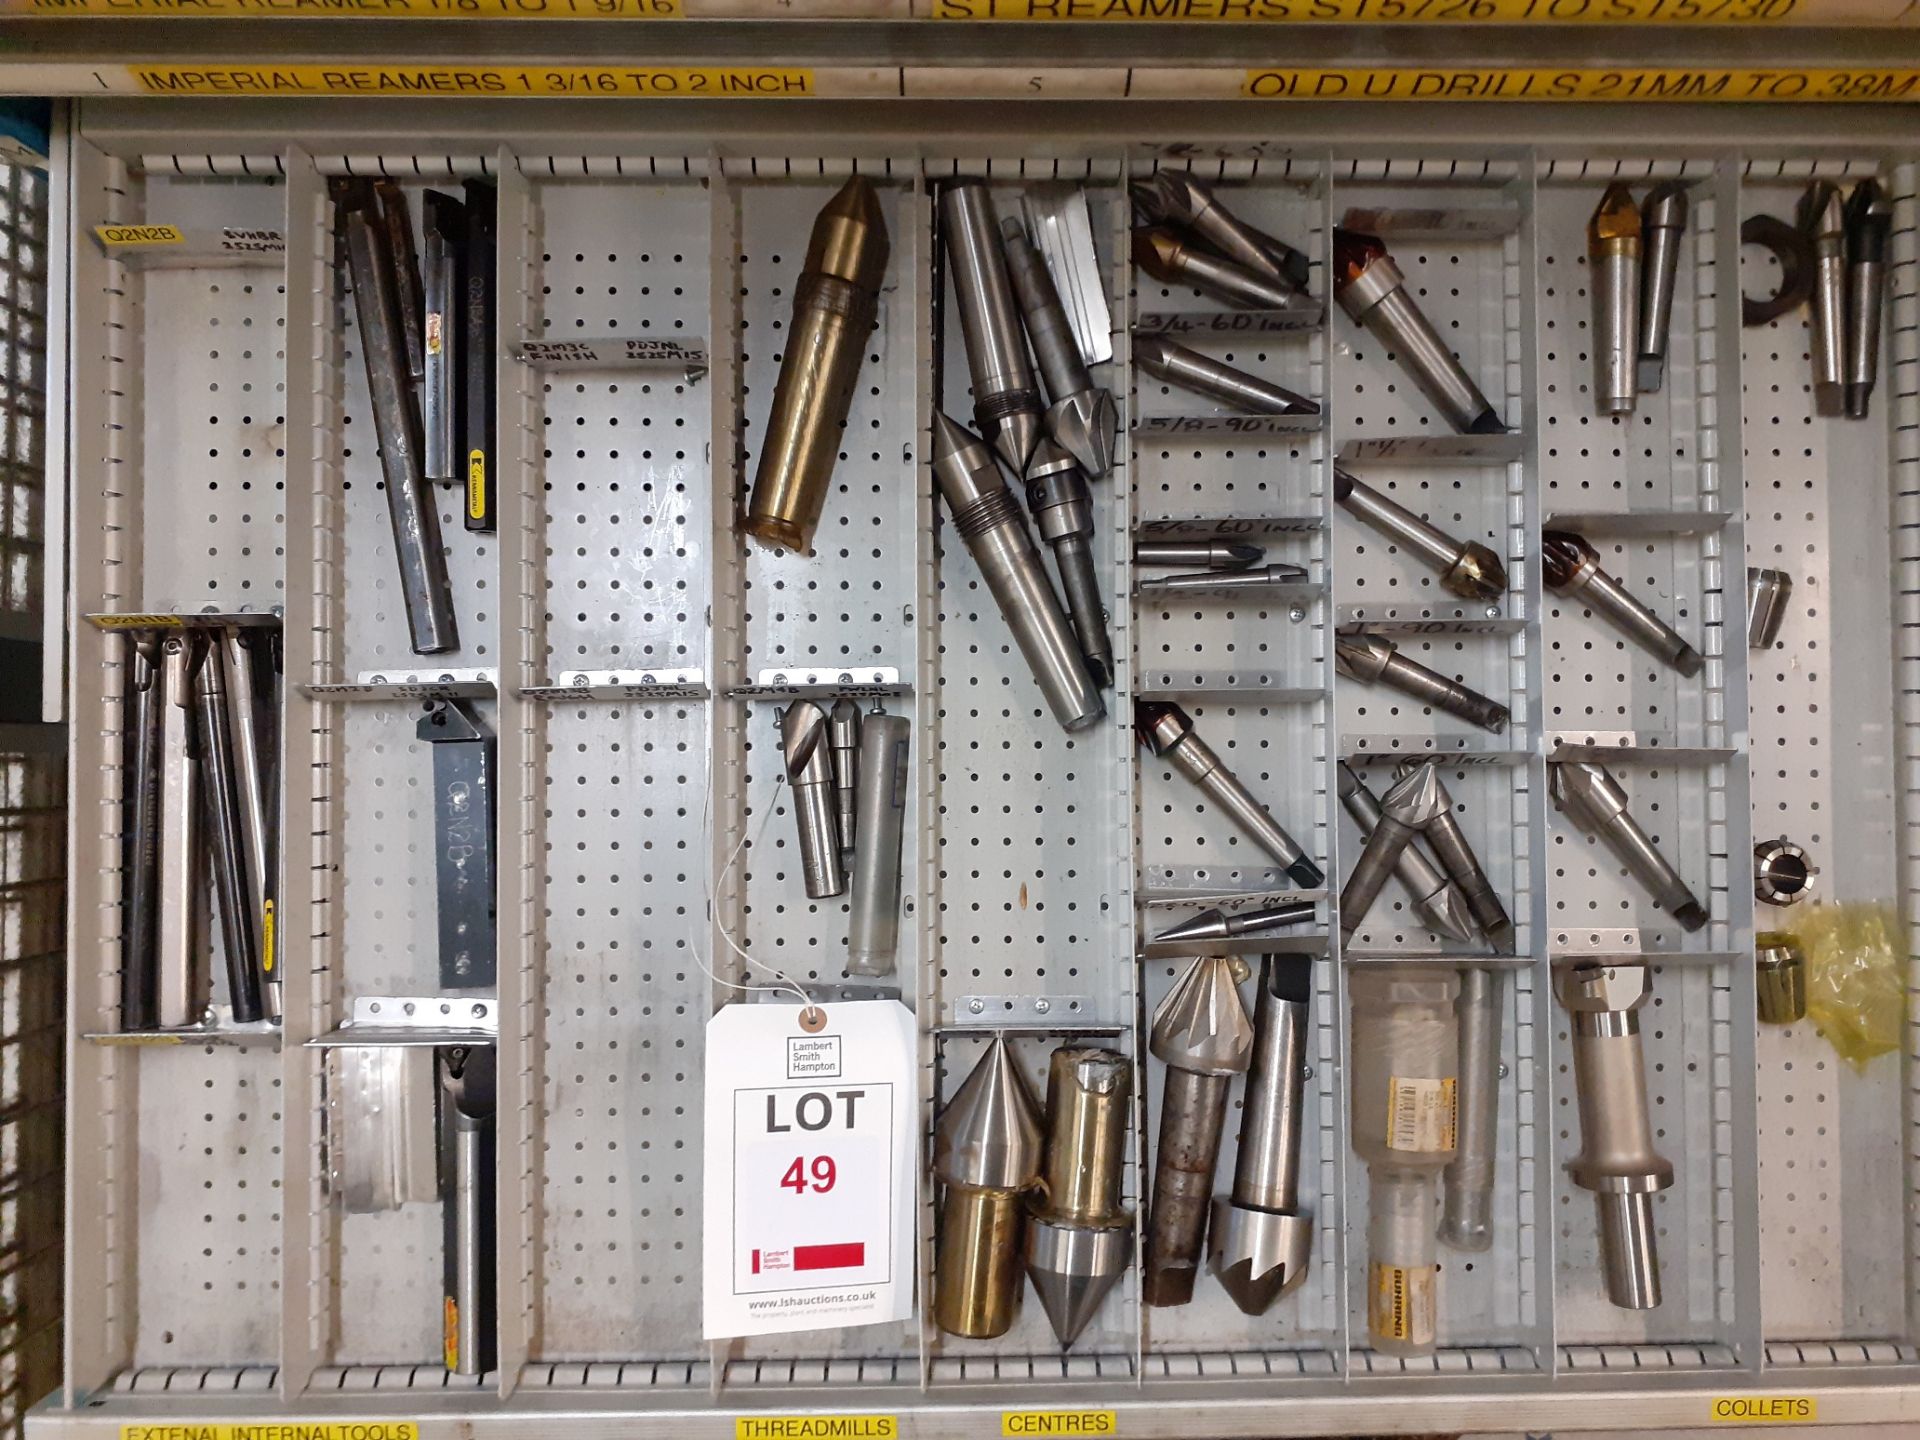 Contents of Drawer M - tools/Centres/Collets (Acceptance of the final highest bid on this lot is